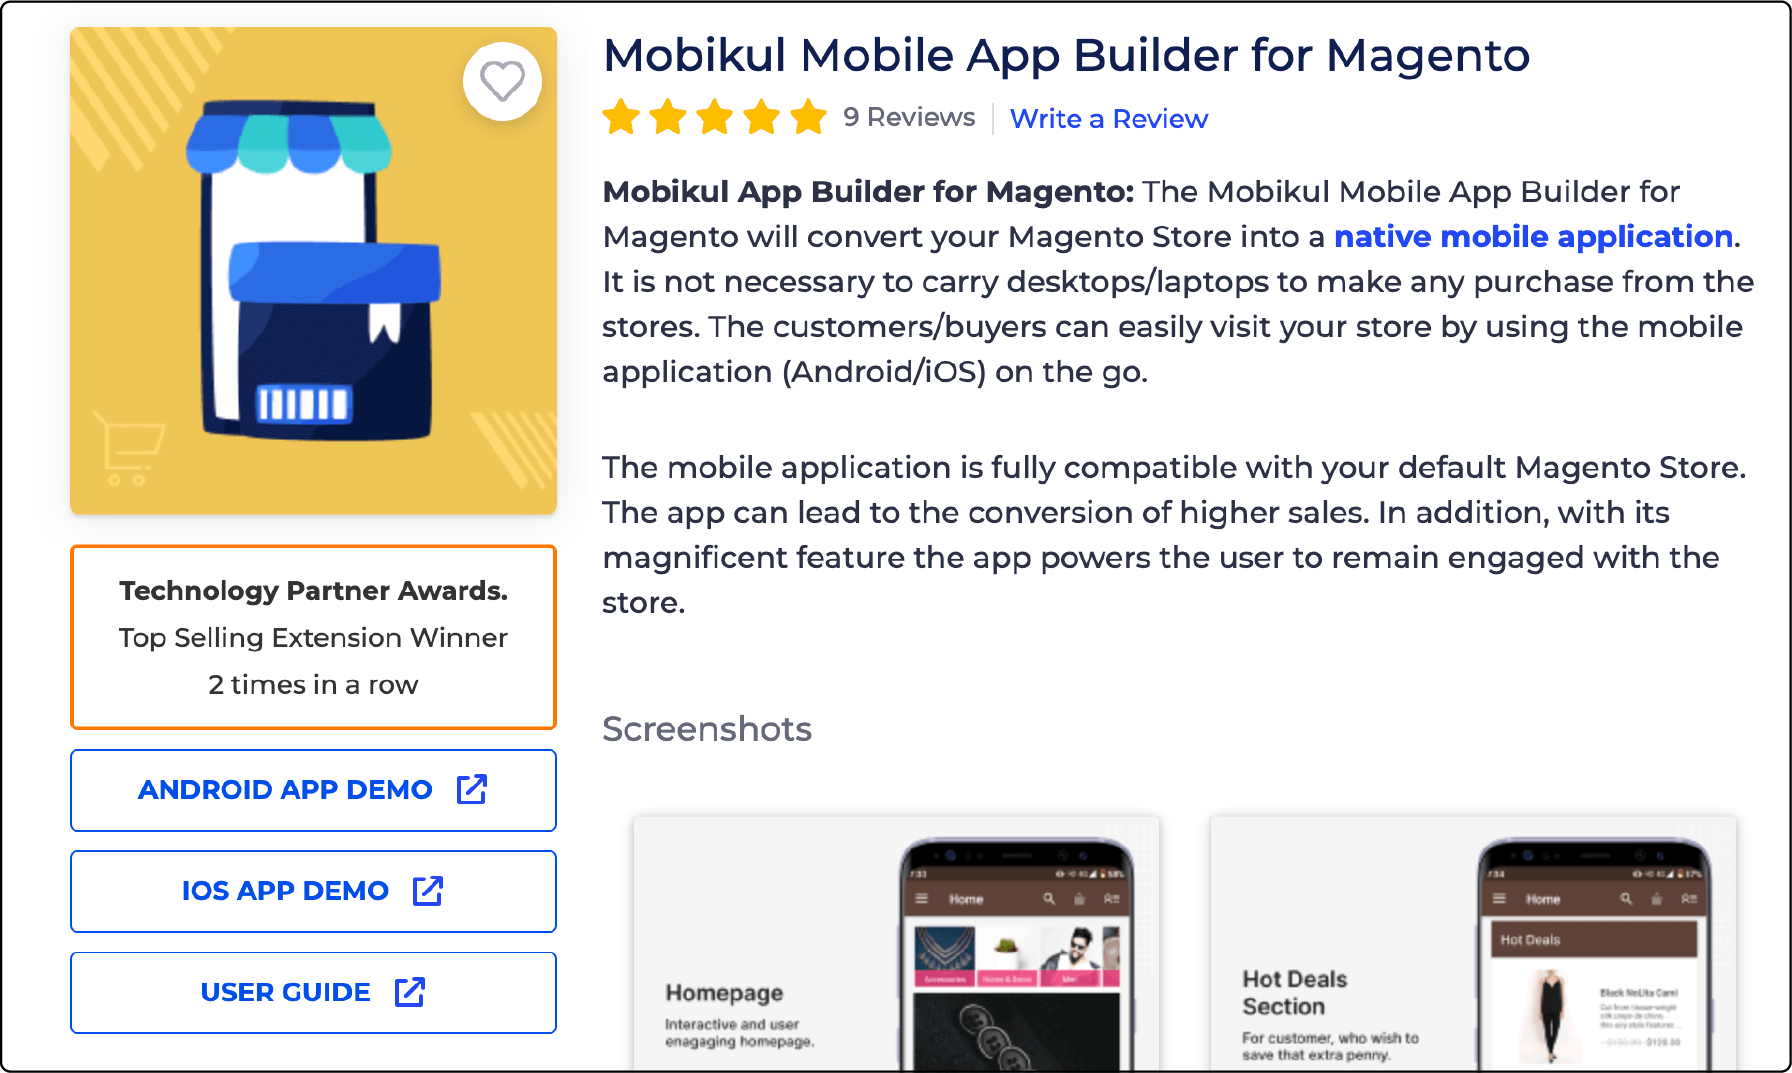 Mobikul's Mobile App Builder interface for Magento 2 by Webkul